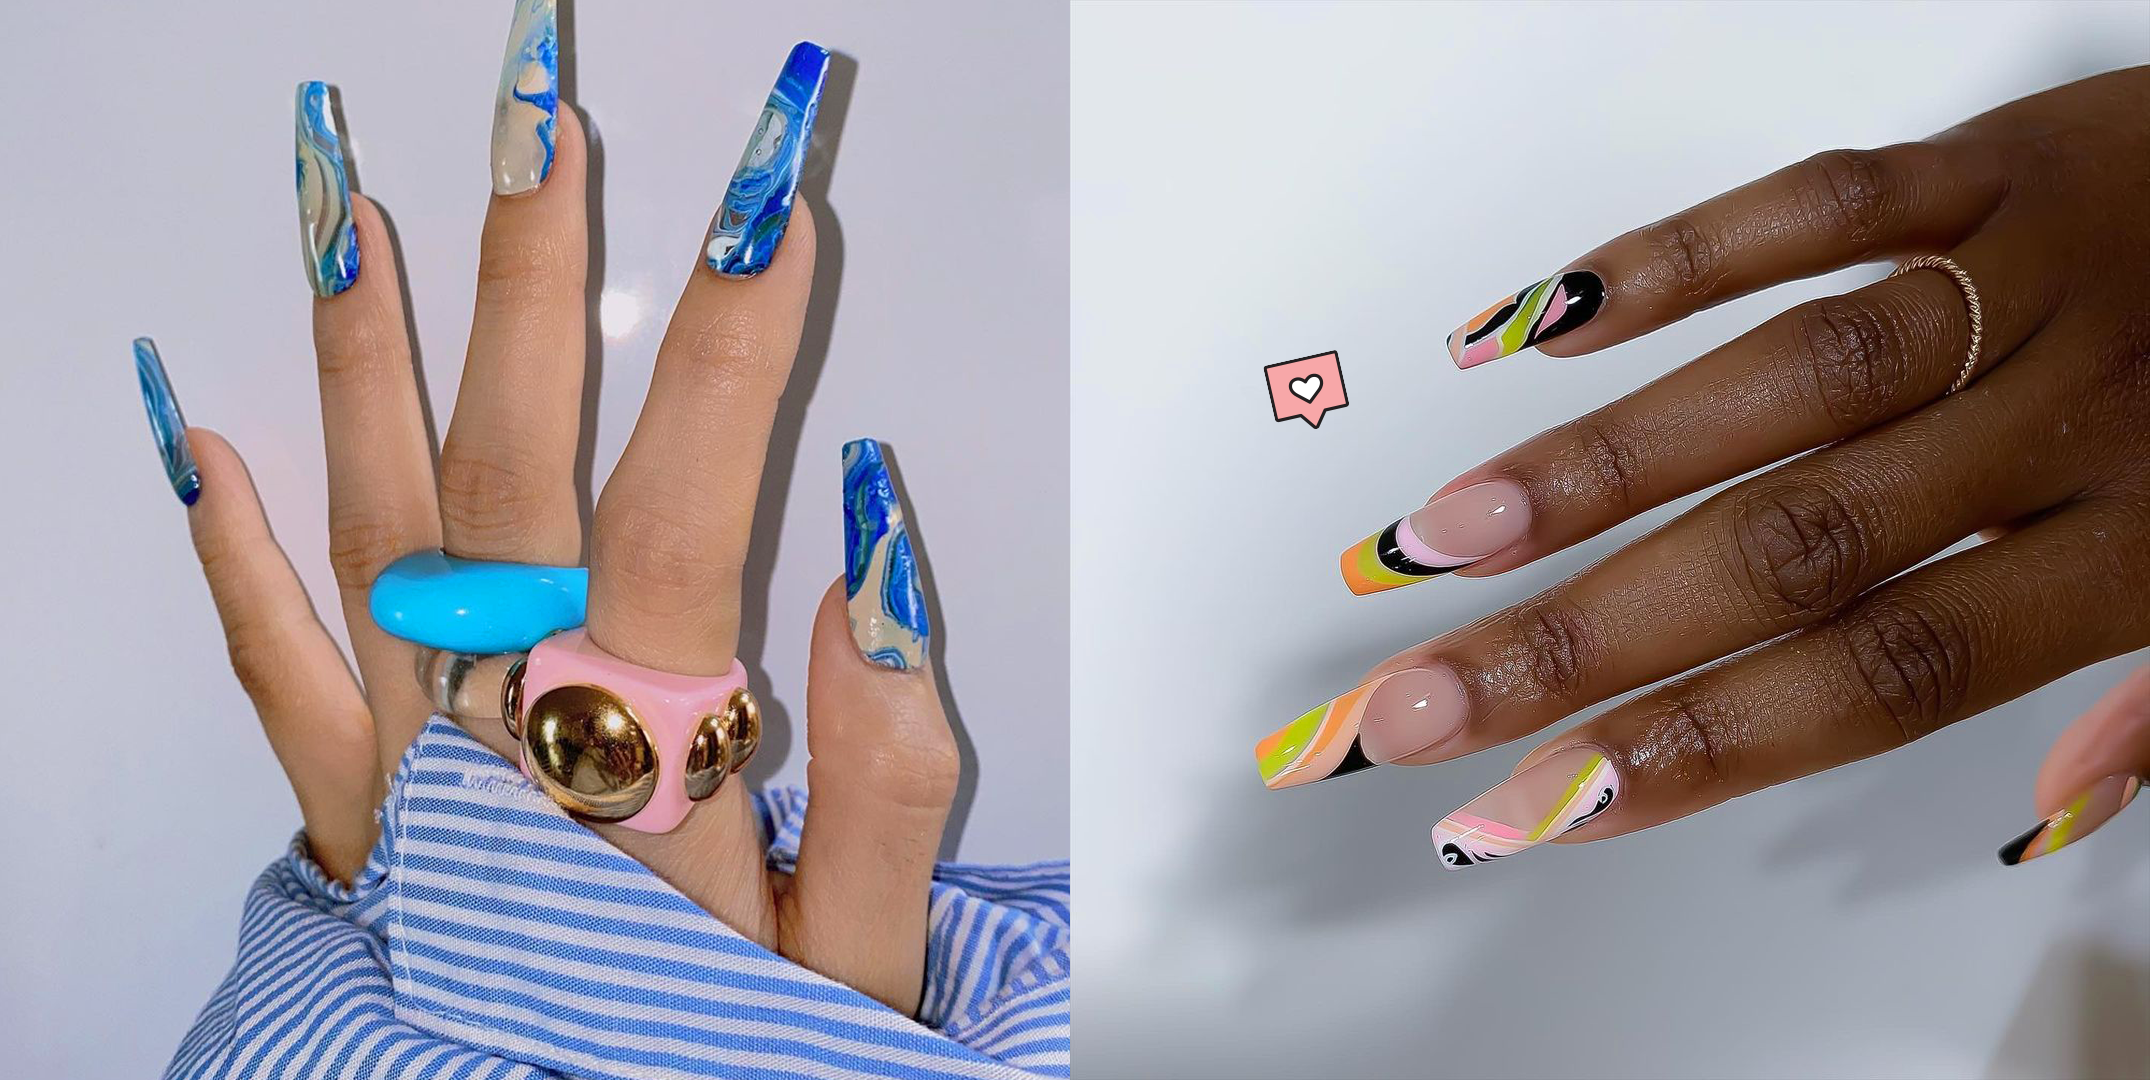 2. "Trendy Coffin Nail Colors to Try for Your Next Manicure" - wide 7